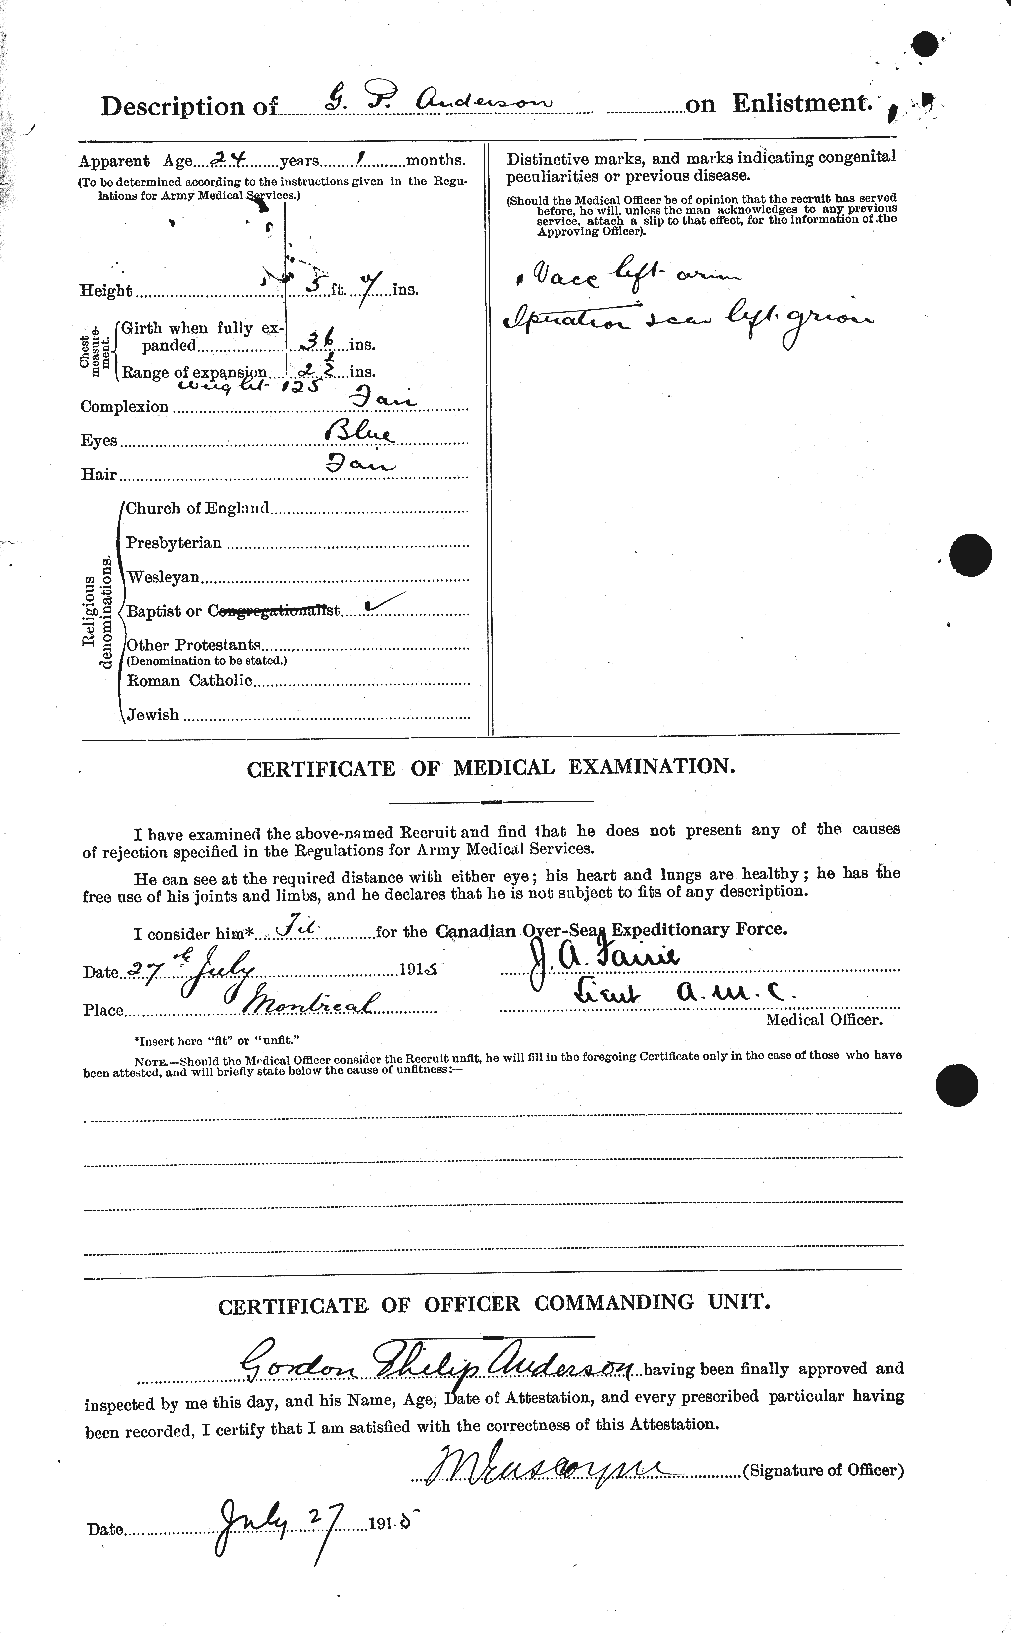 Personnel Records of the First World War - CEF 209661b